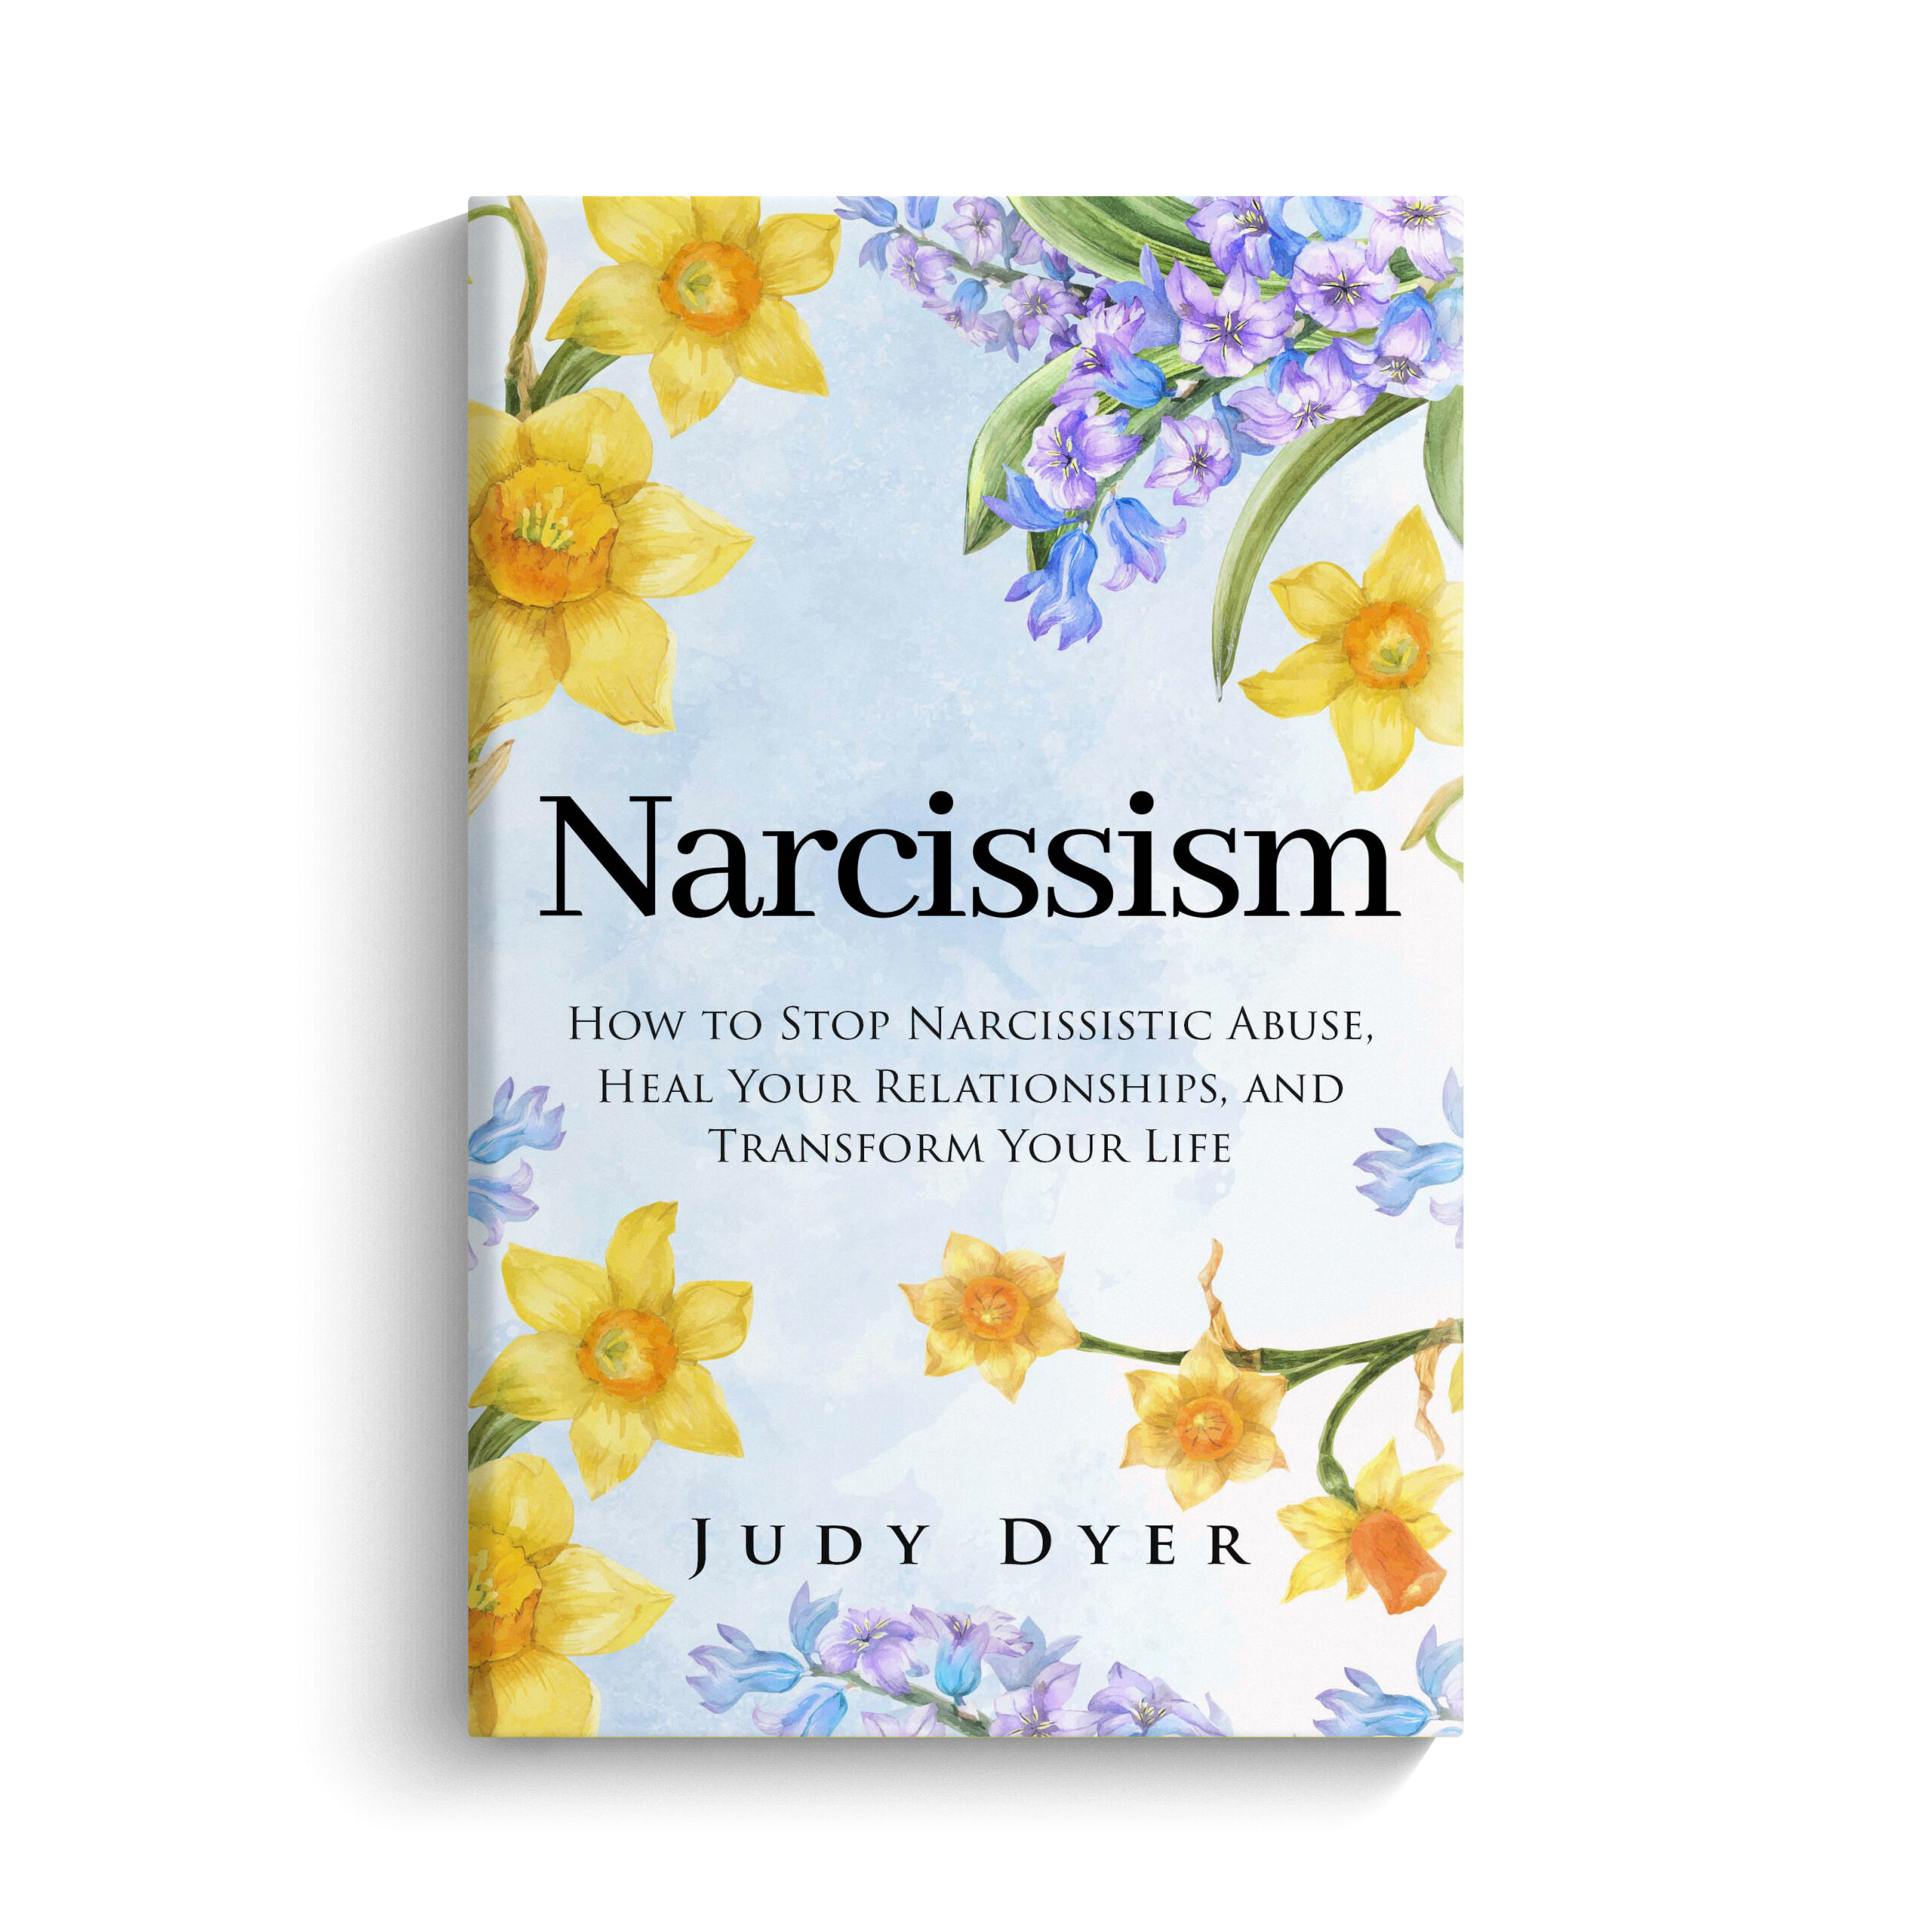 Narcissism by Judy Dyer